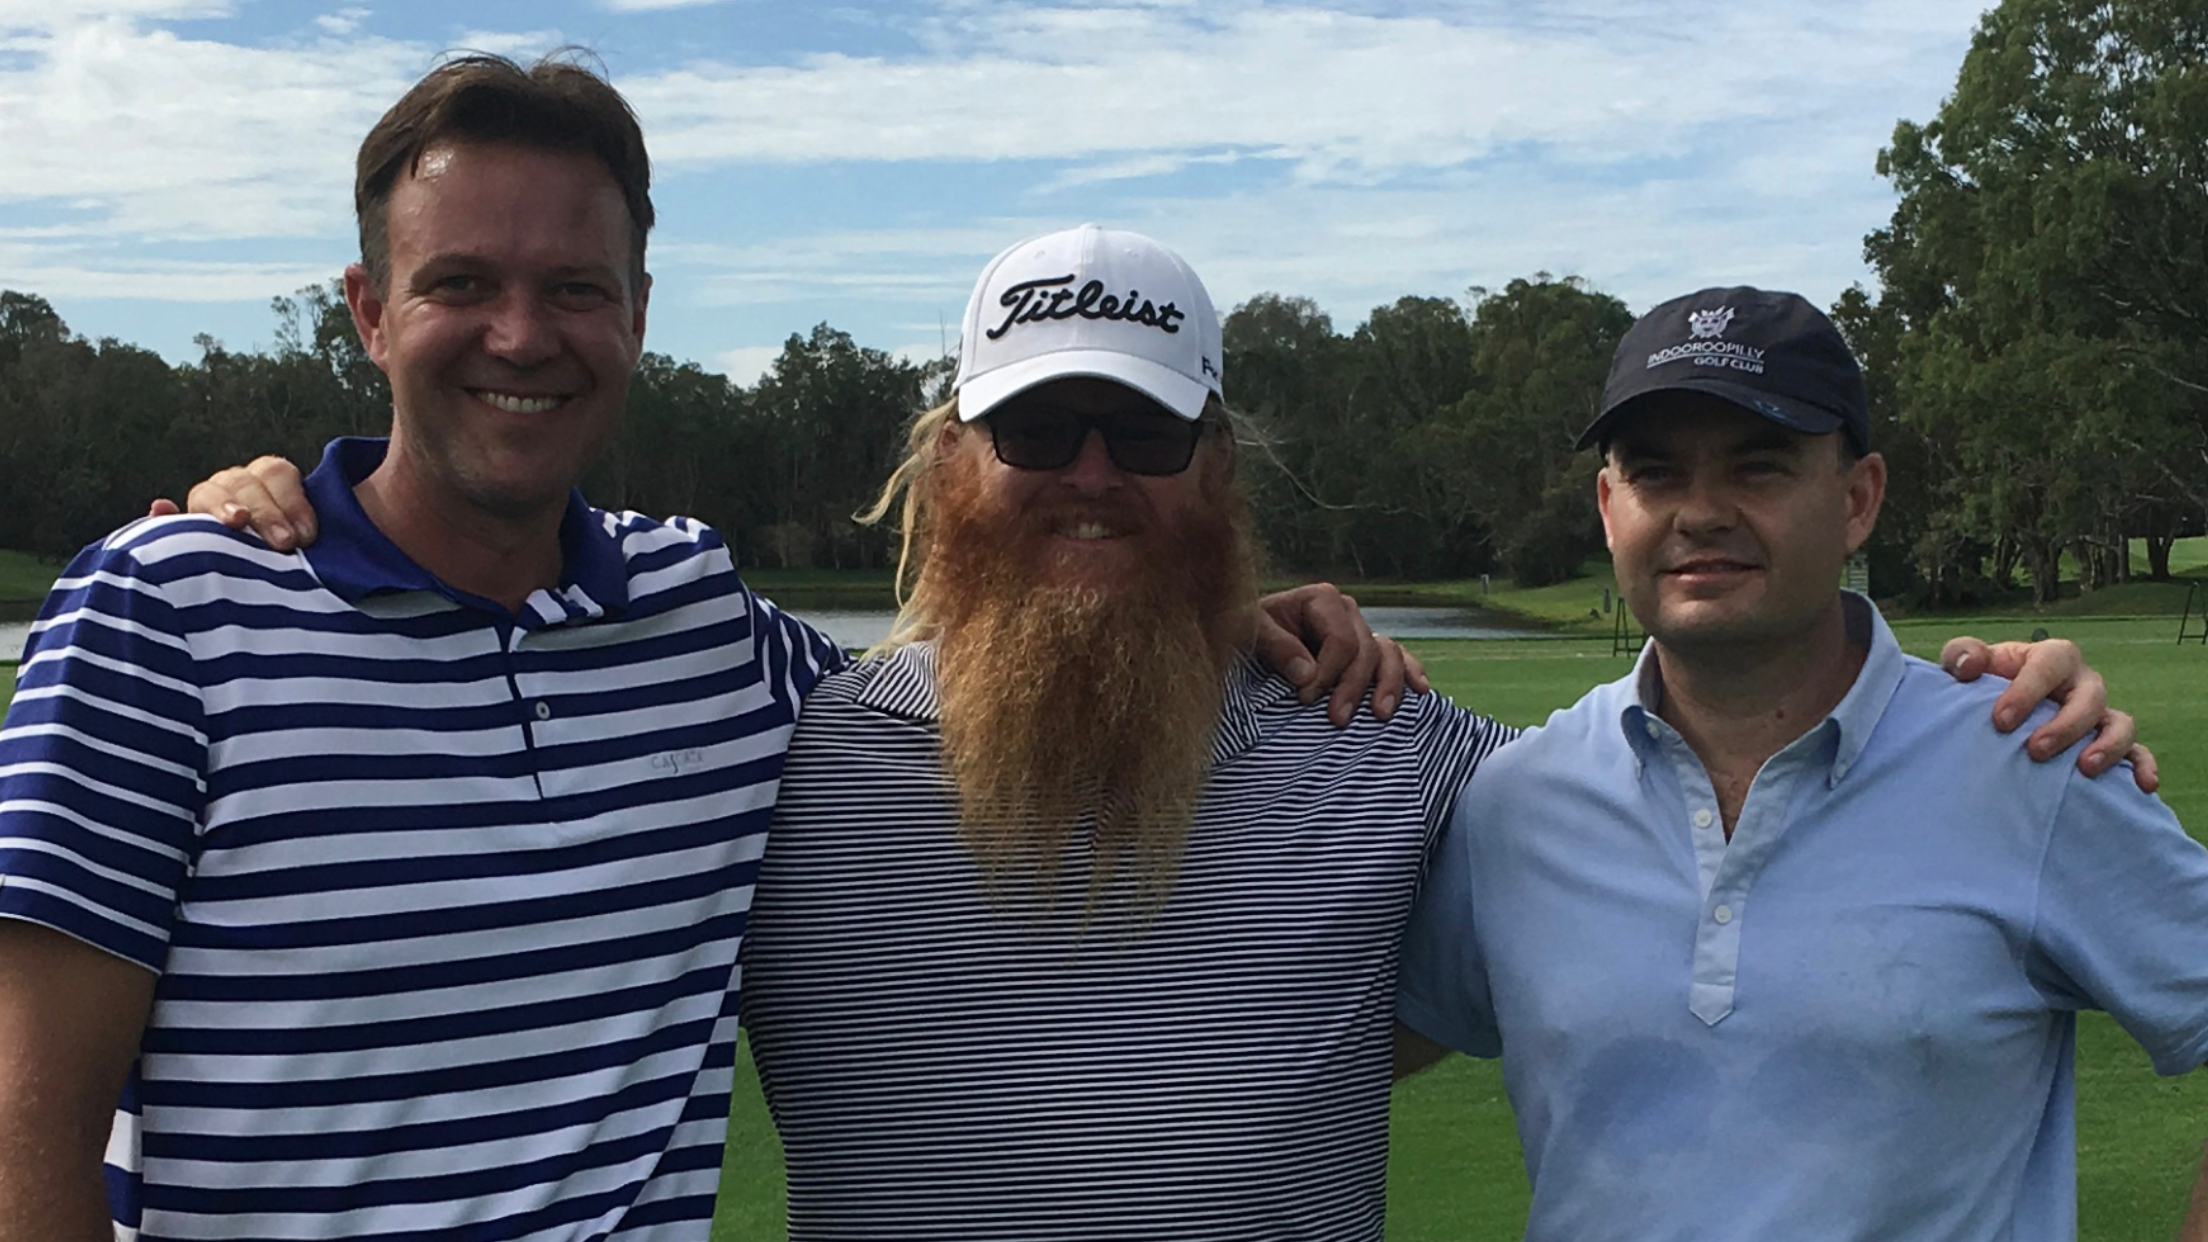 Emmet (far right) with his two friends after a game of golf. (Source: supplied)